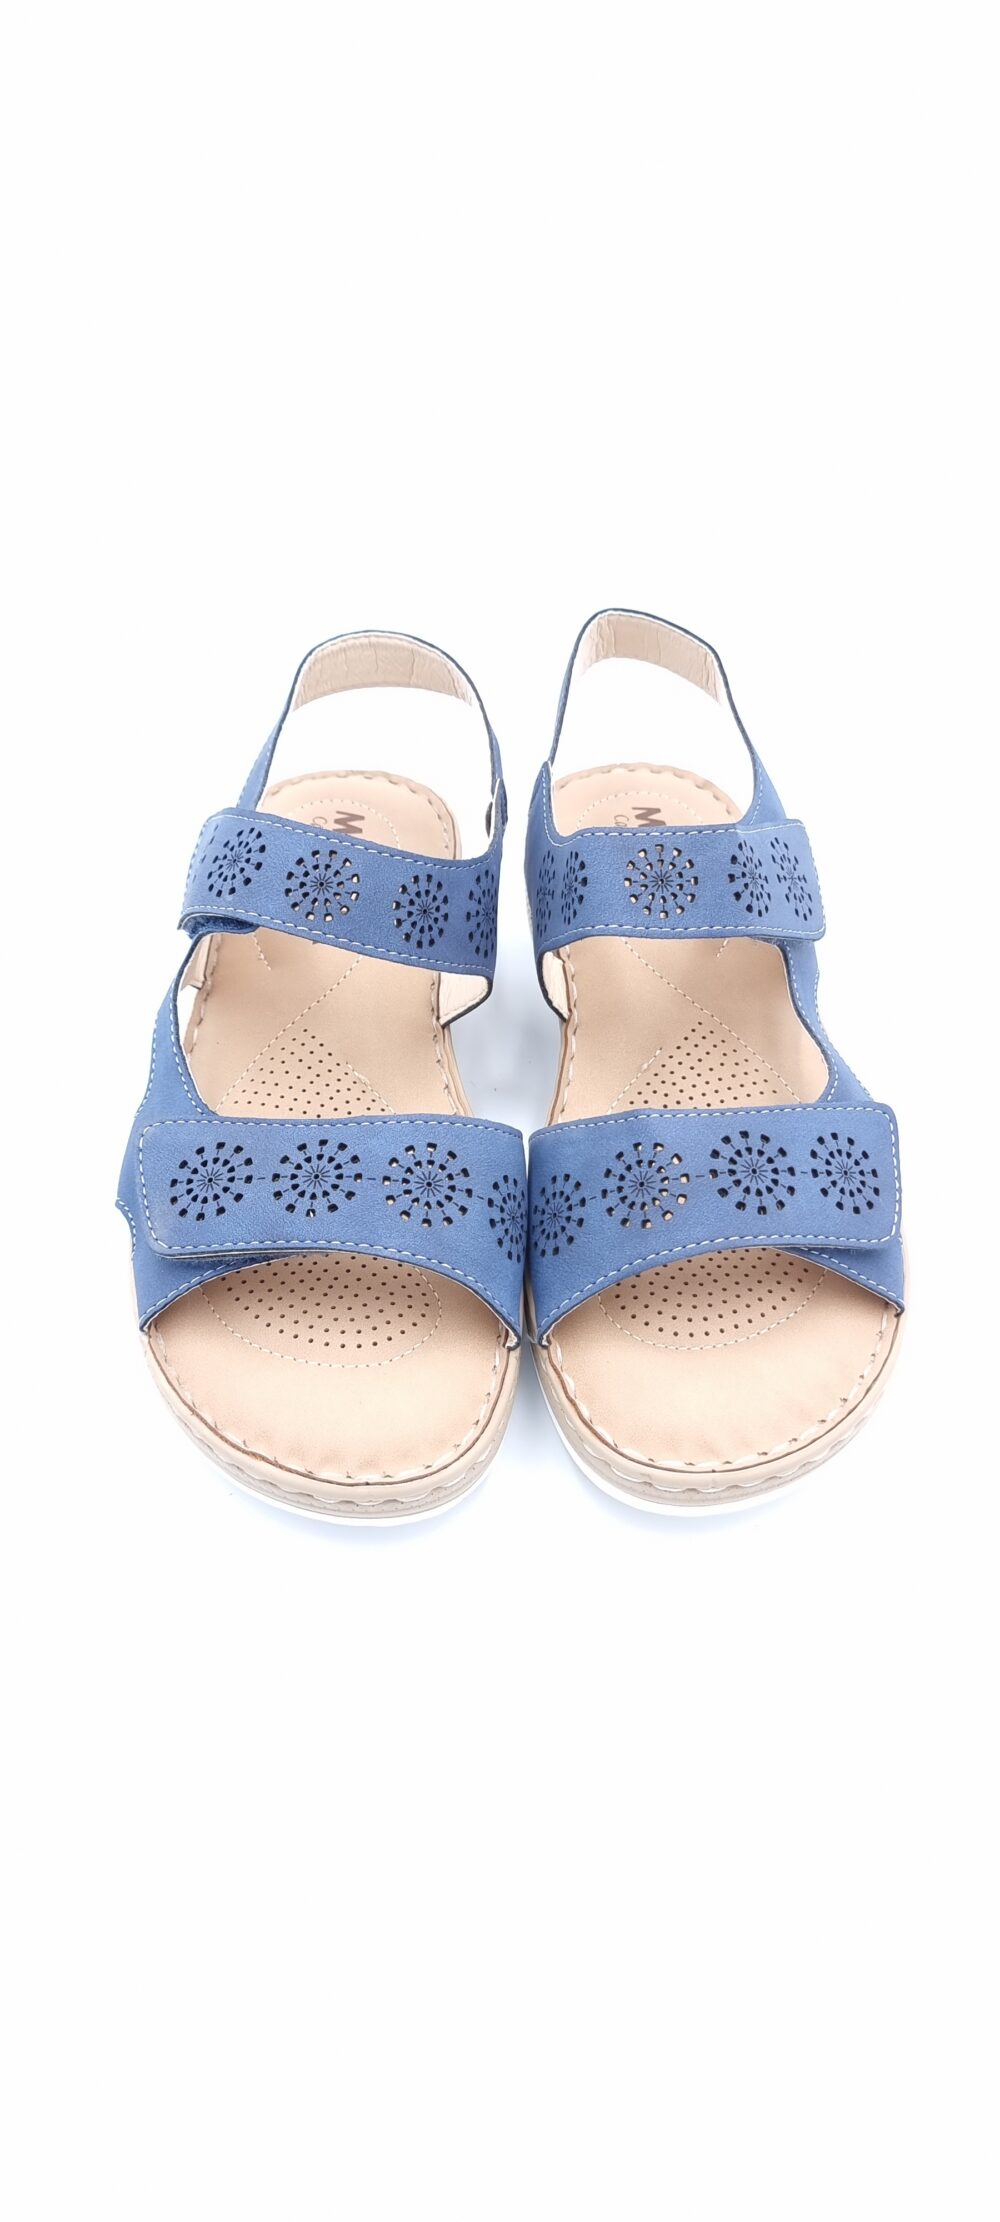 Sandal with adjustable perforated straps blue